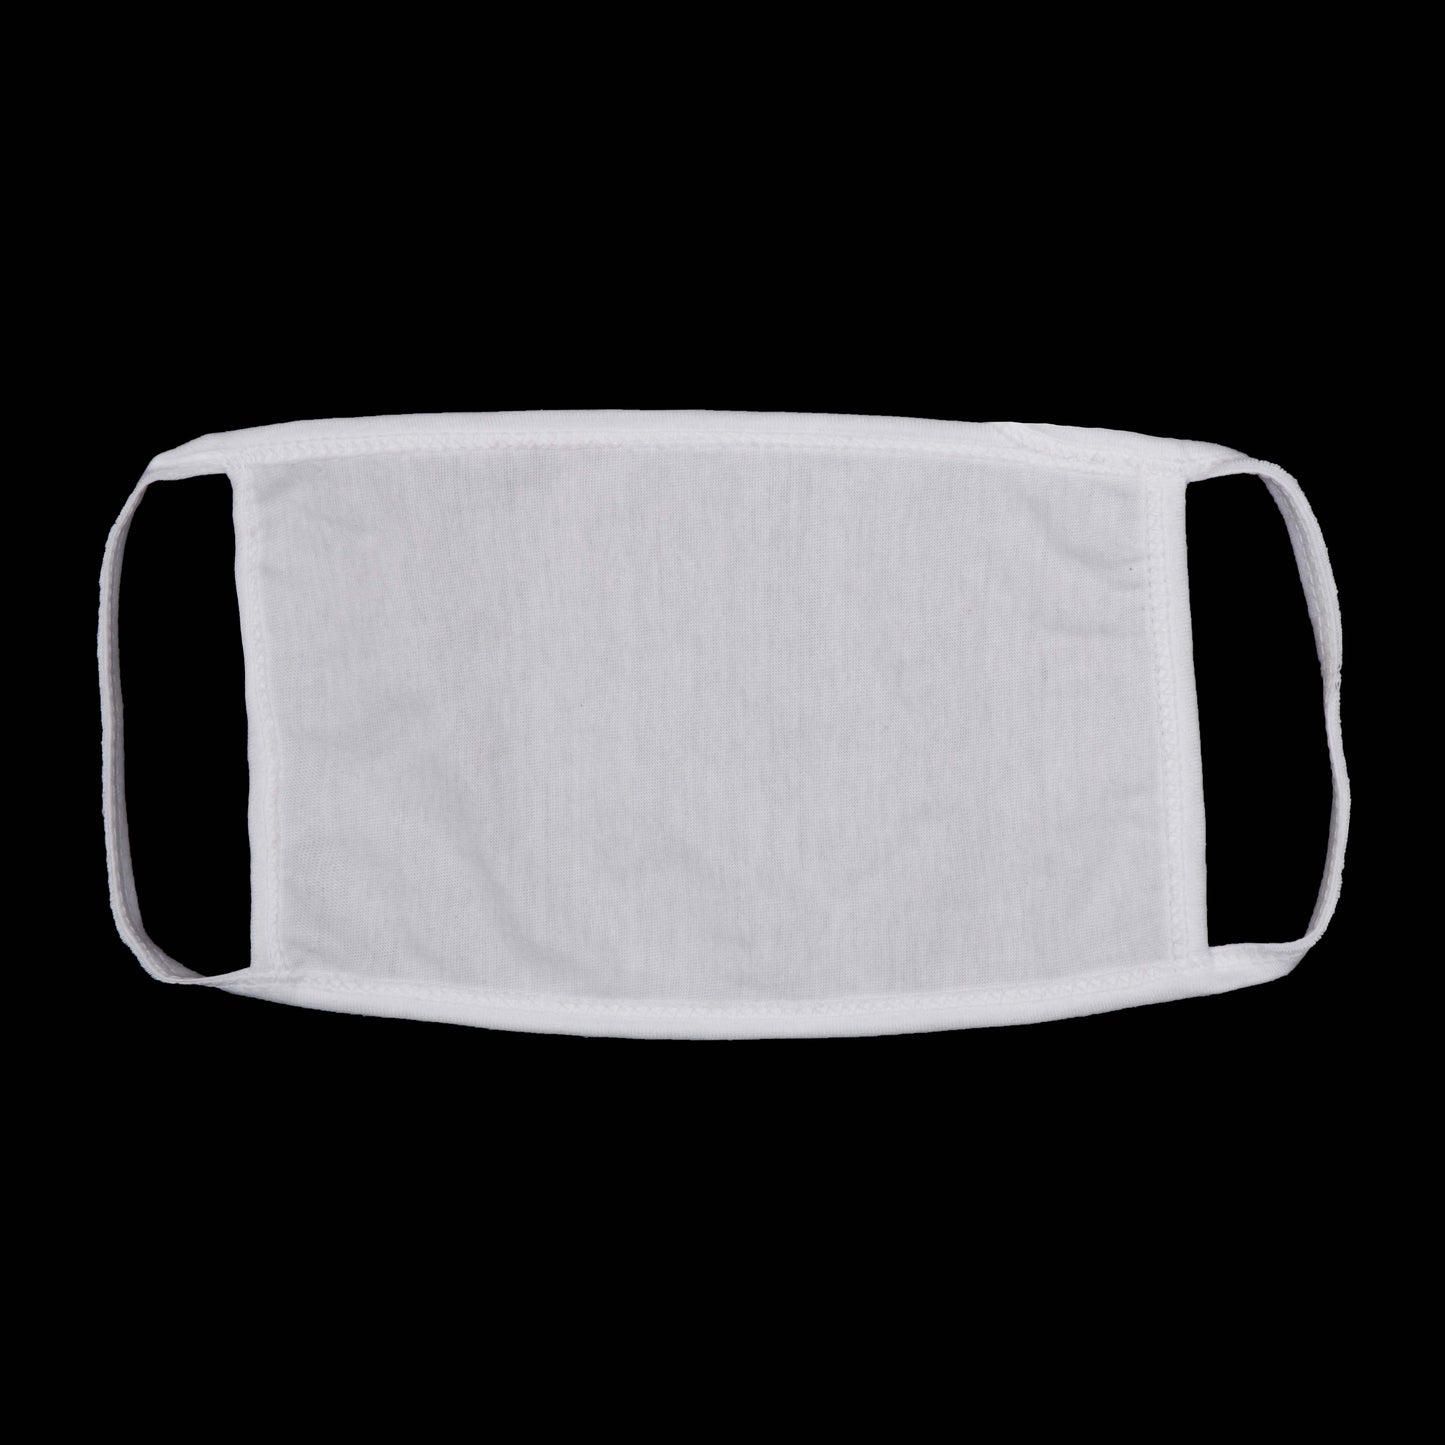 F Gear Cotton Dustproof Face Mask (Pack of 100 pieces)